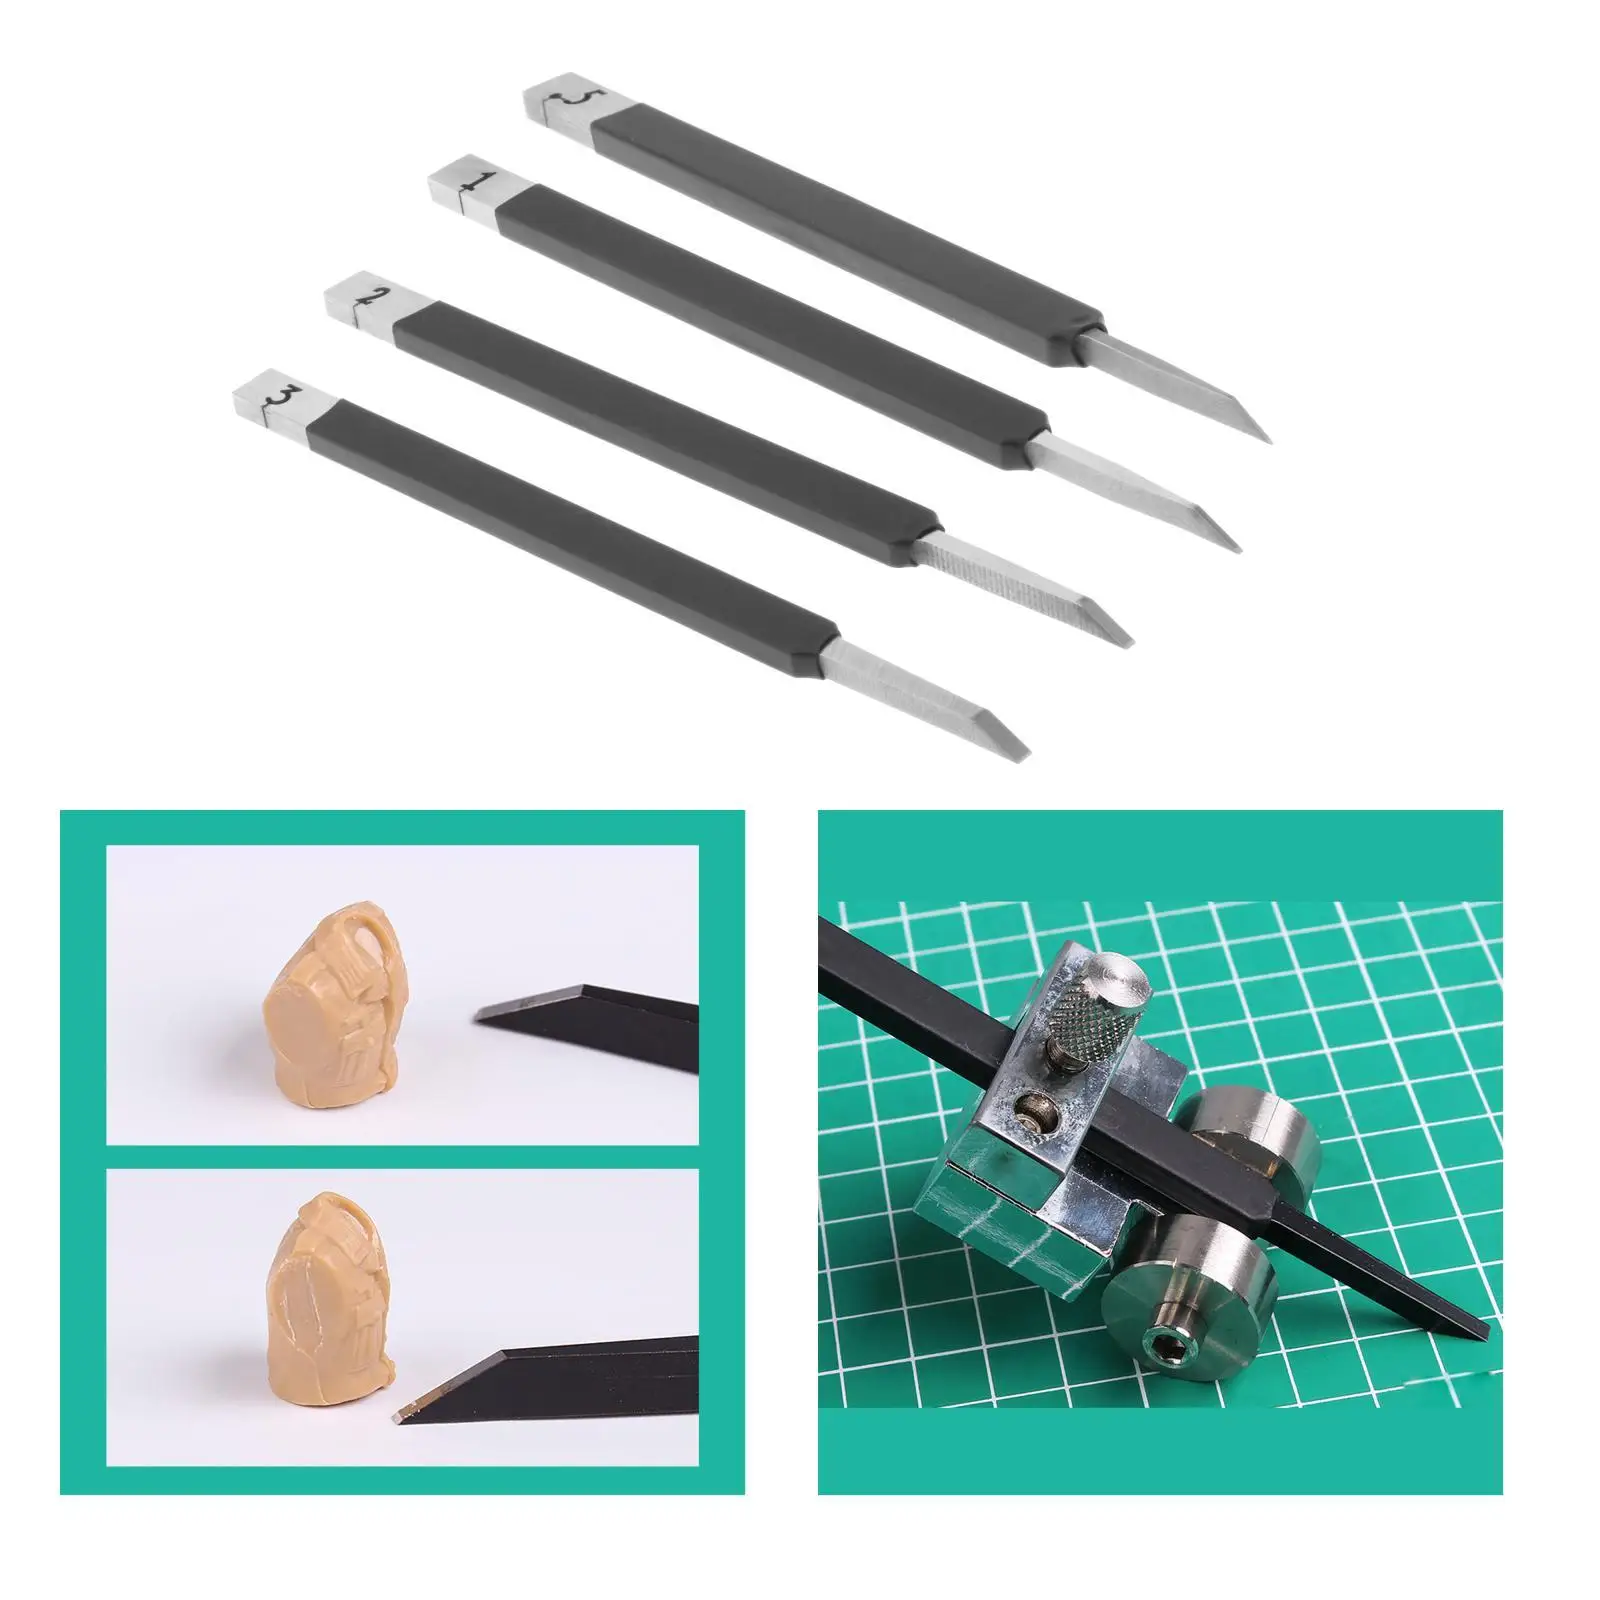 Model Building Tool Utility Knife Carving Knife Burin Tool for Model Building Tools Supplies